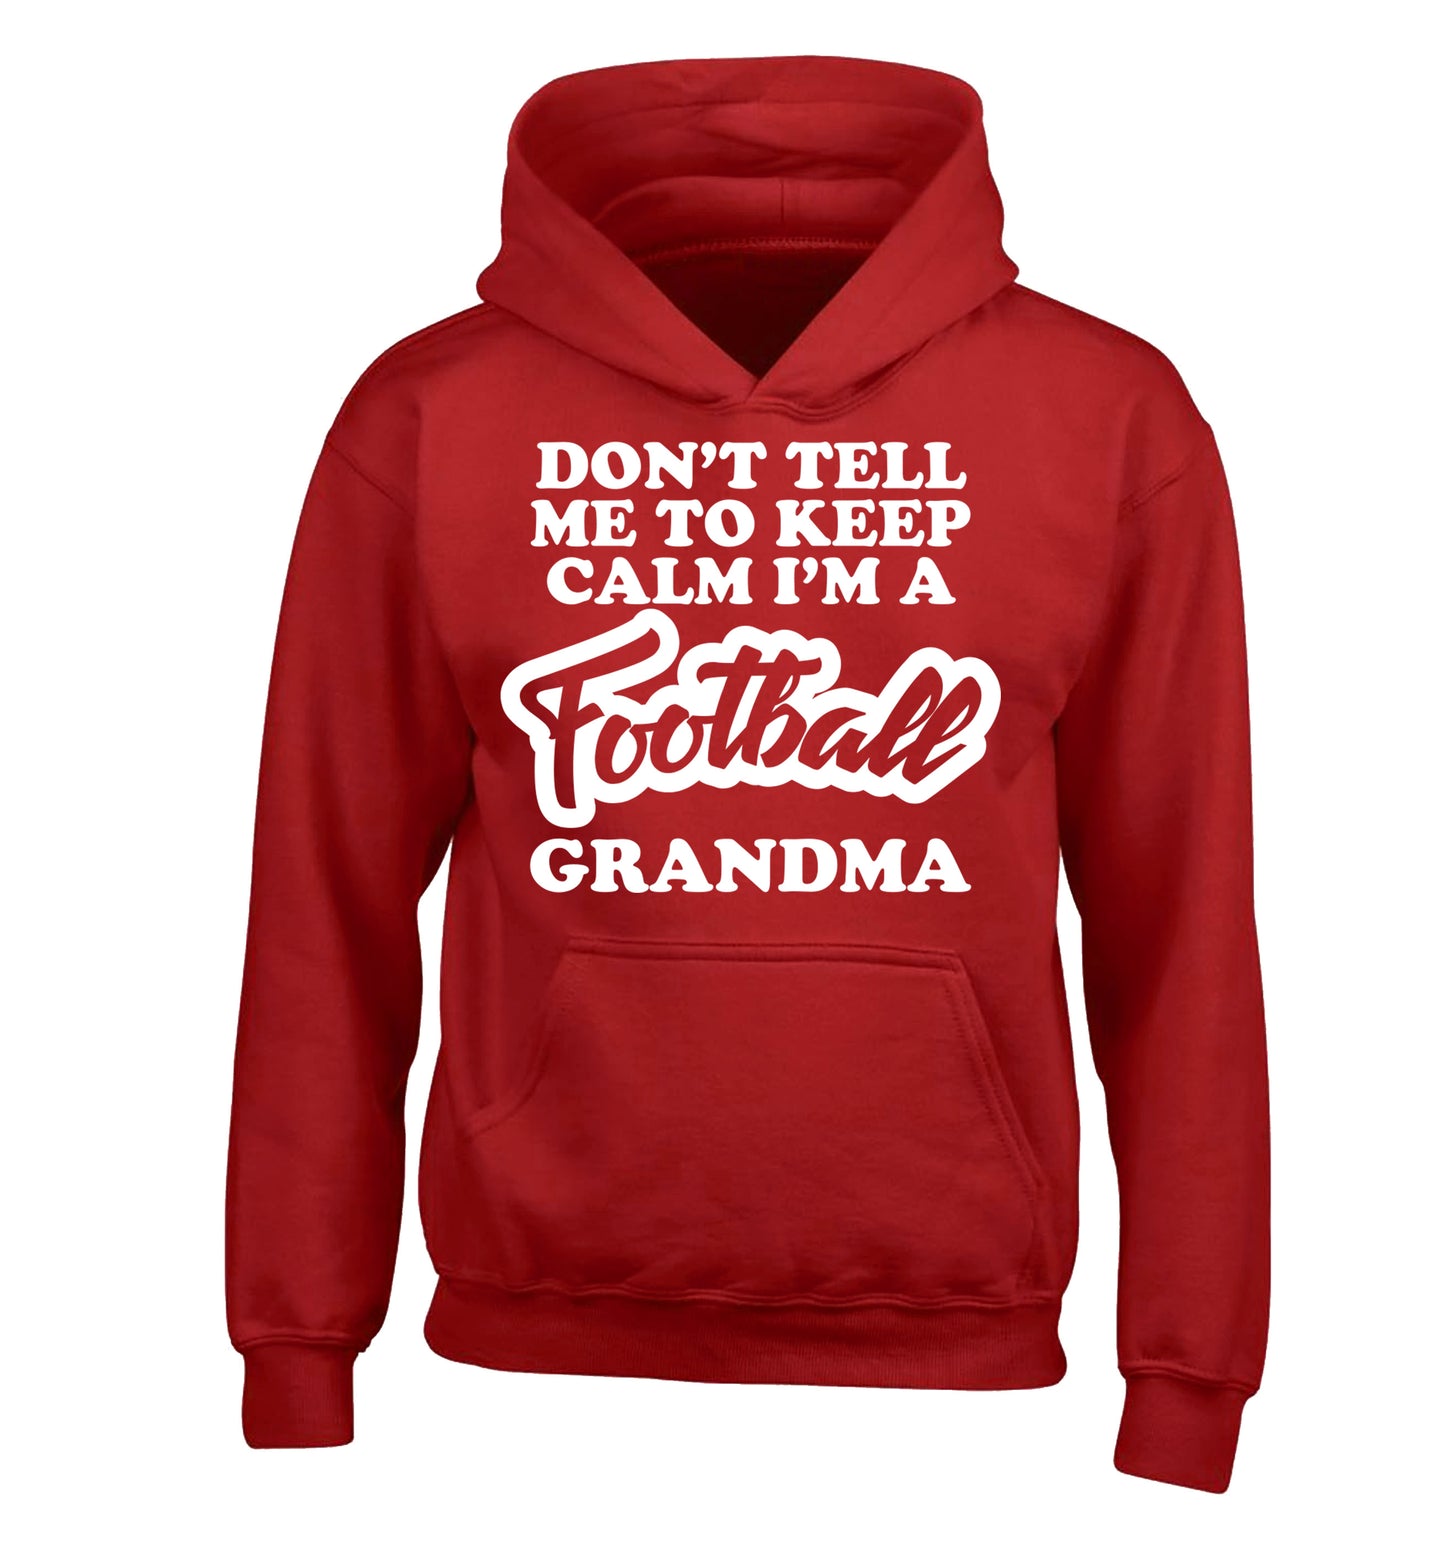 Don't tell me to keep calm I'm a football grandma children's red hoodie 12-14 Years